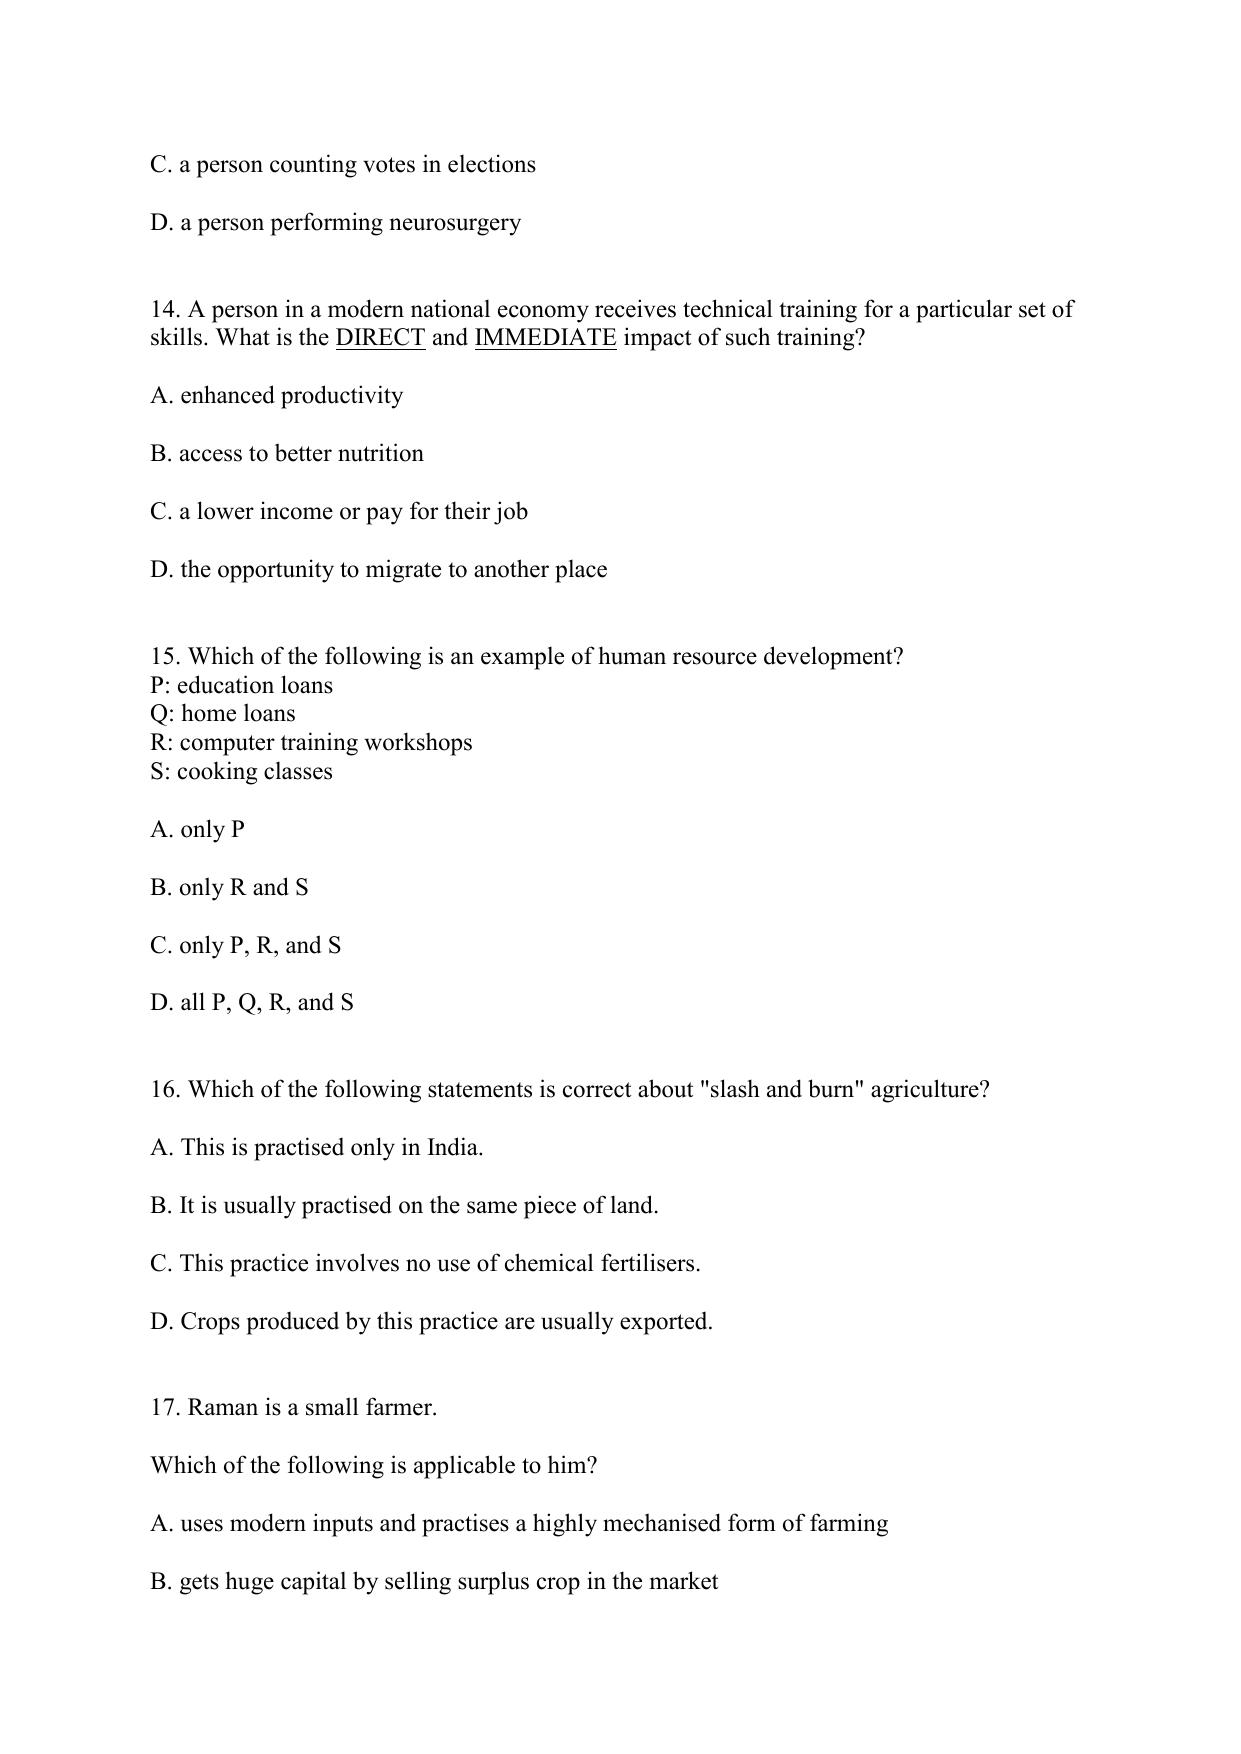 CBSE Class 12 Geography Term 1 Practice Questions 2021-22 - Page 5